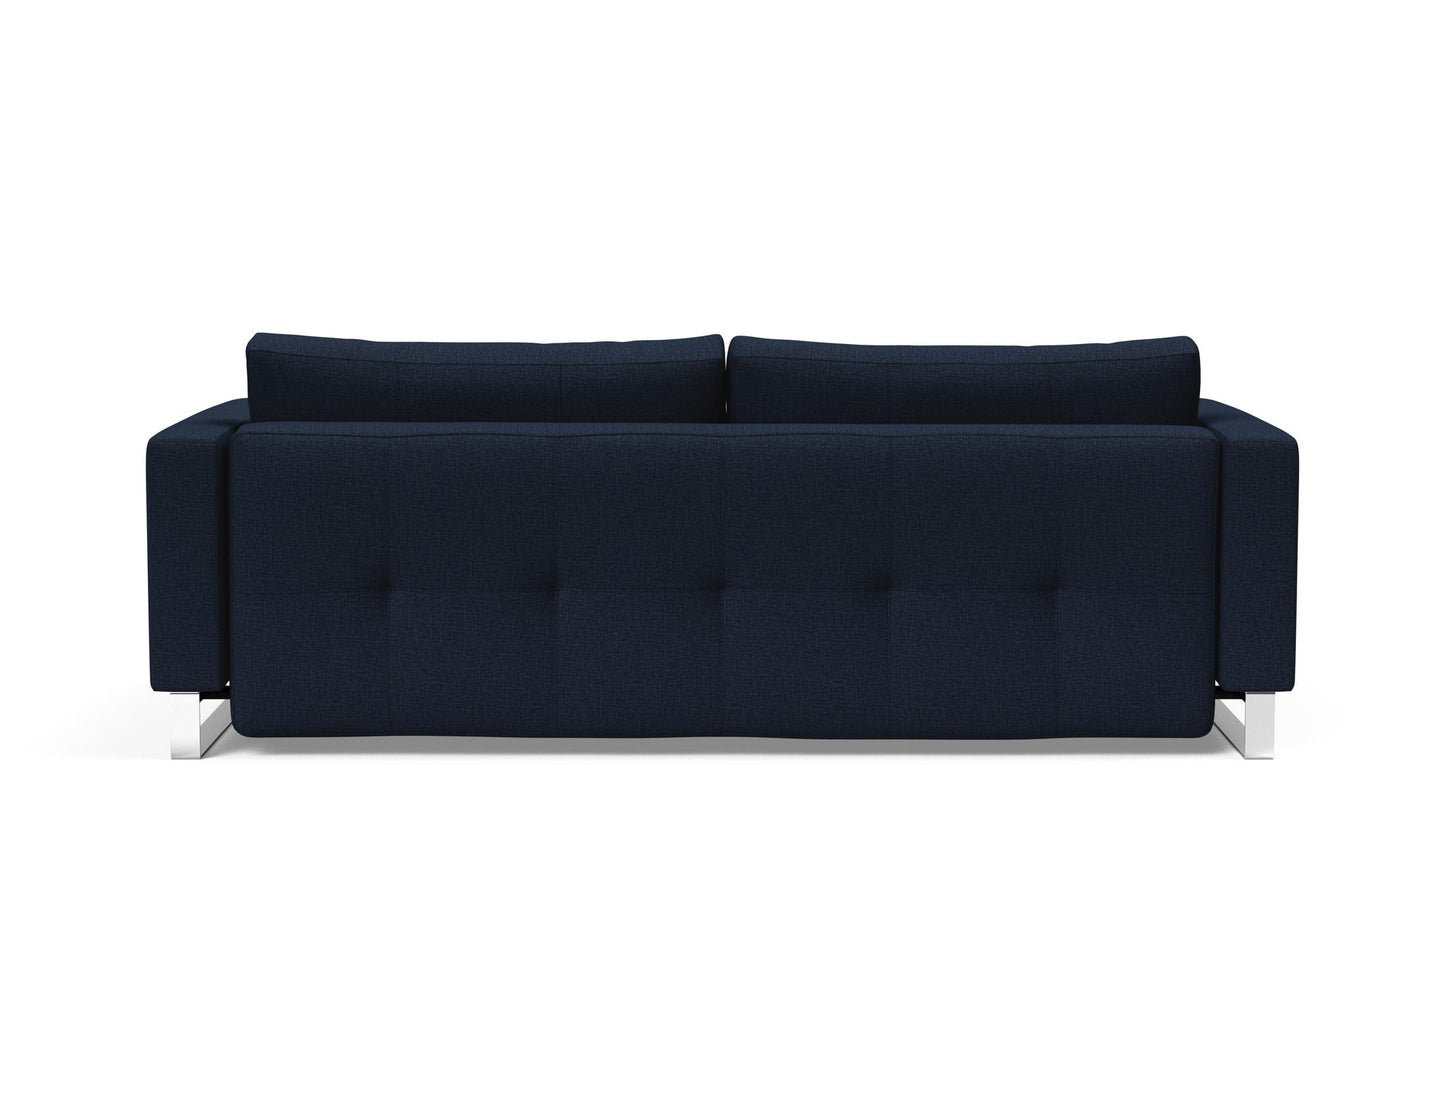 Innovation Living Cassius Deluxe Excess Lounger